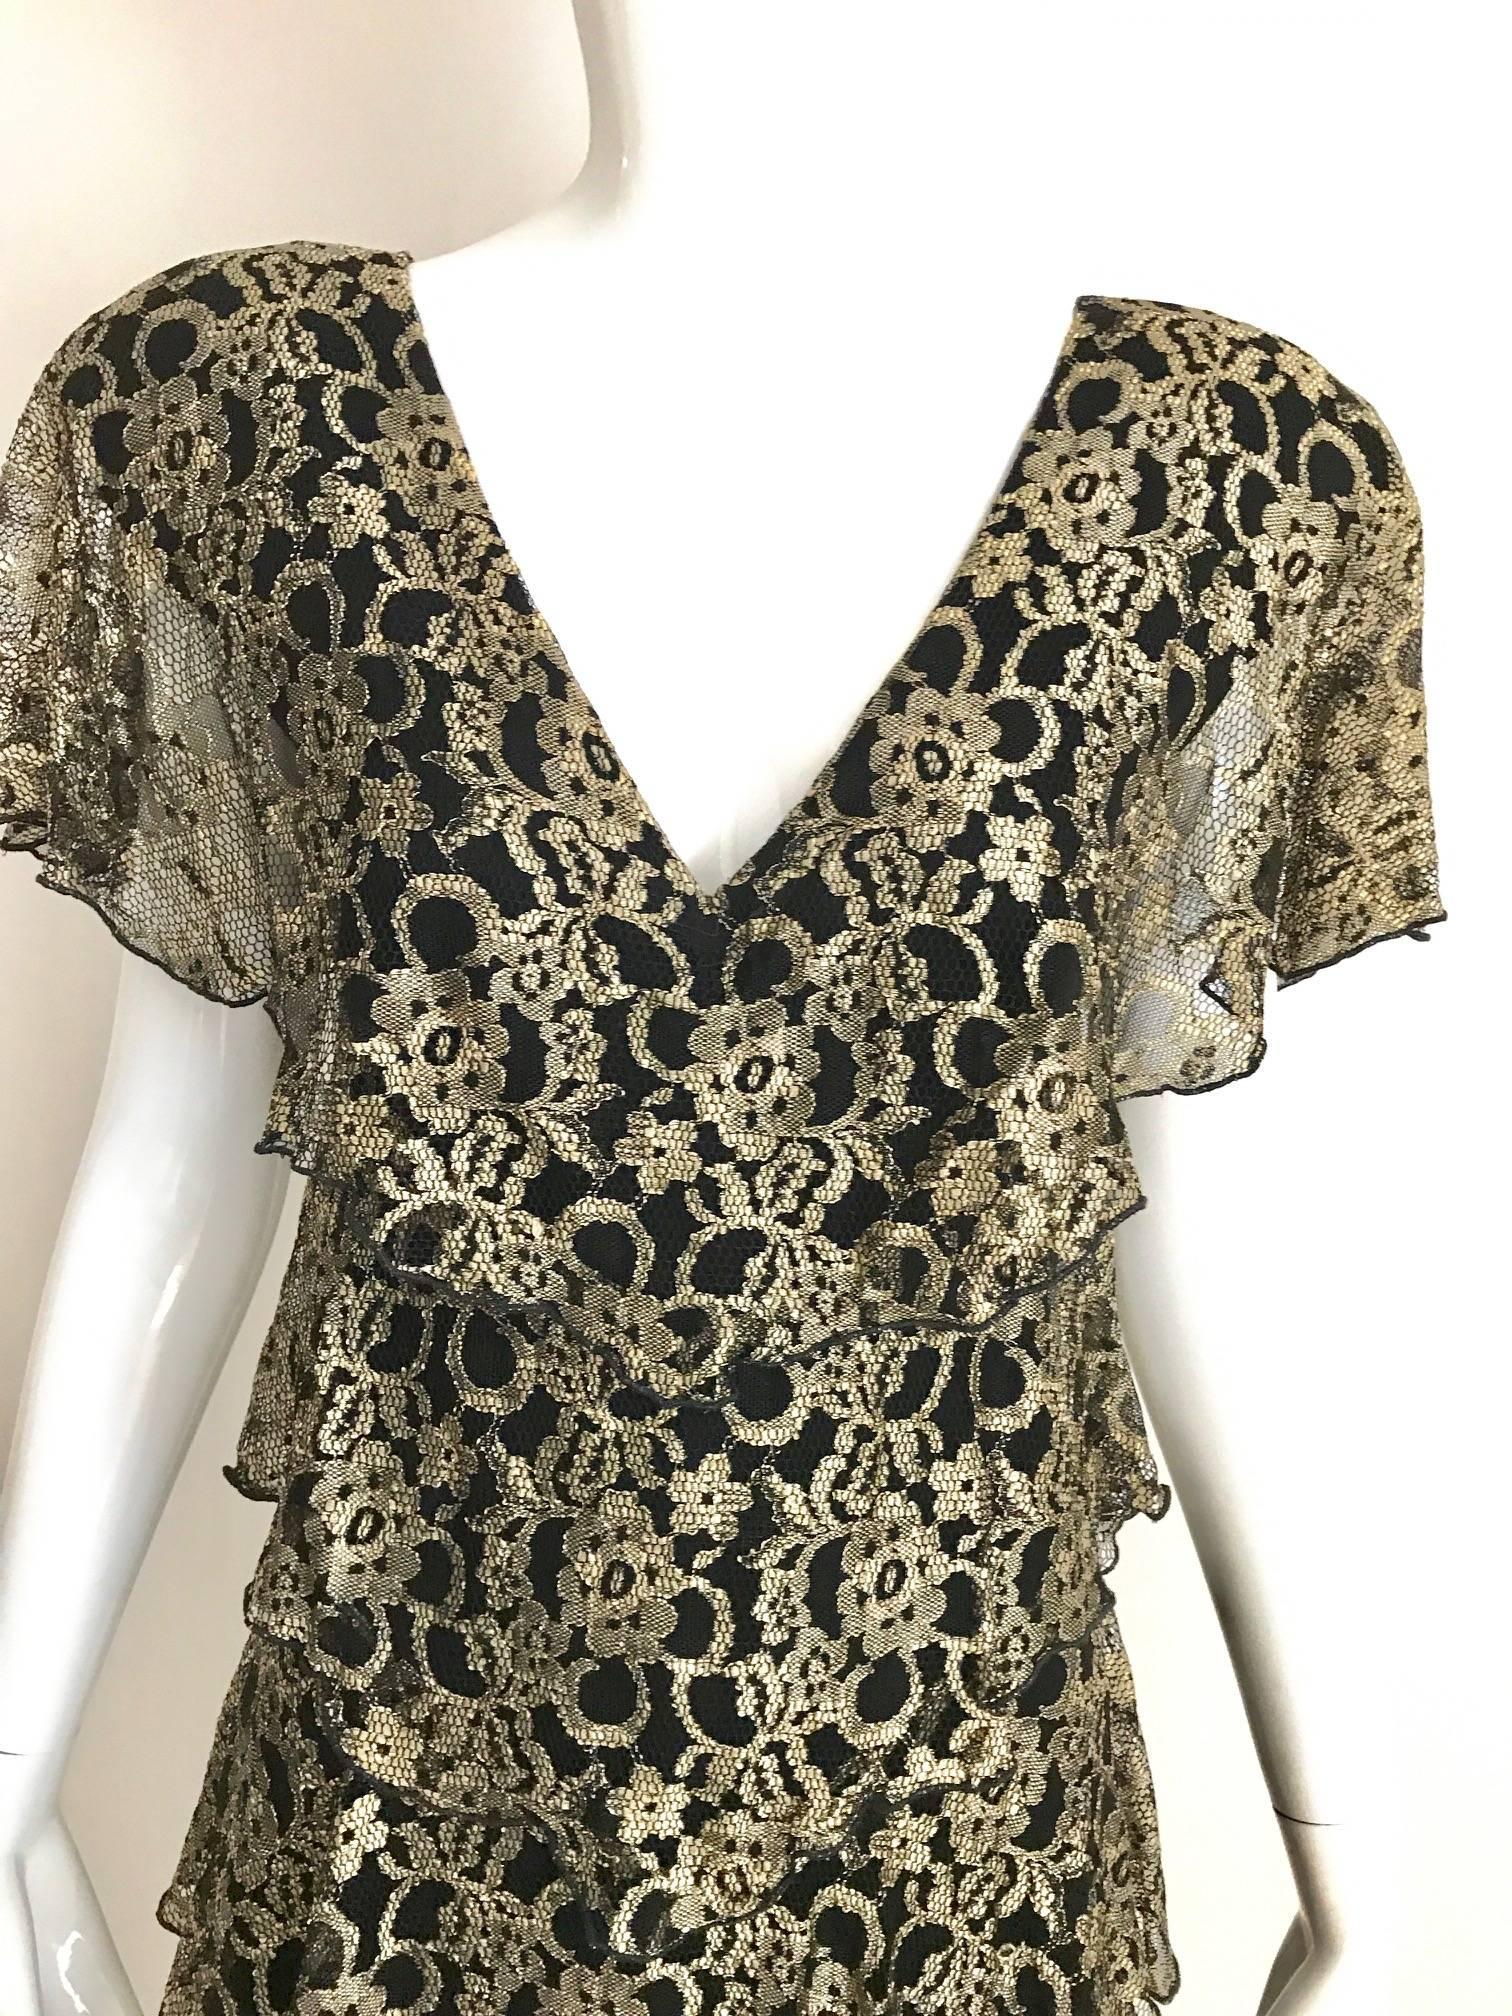 Vintage Holly Harp gold brown lace dress lined in black jersey.
Fit size US 4